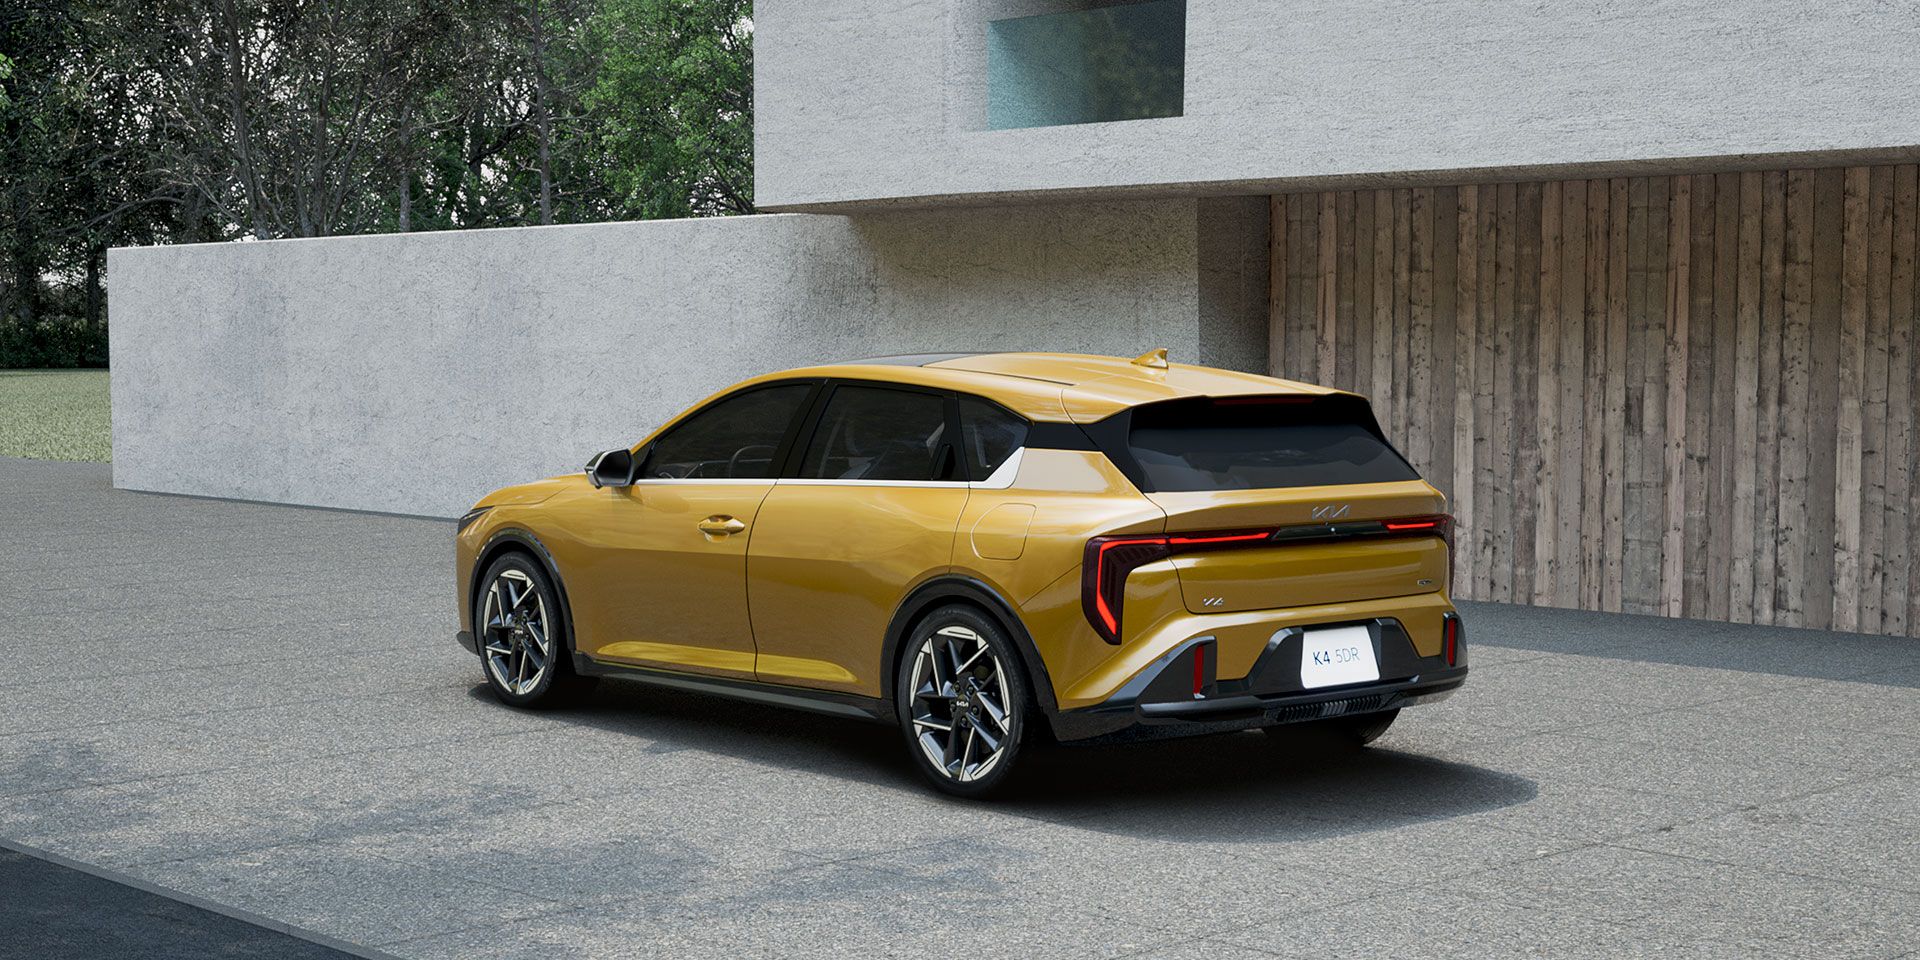 Kia Will Eventually Bring the K4 Hatchback to America